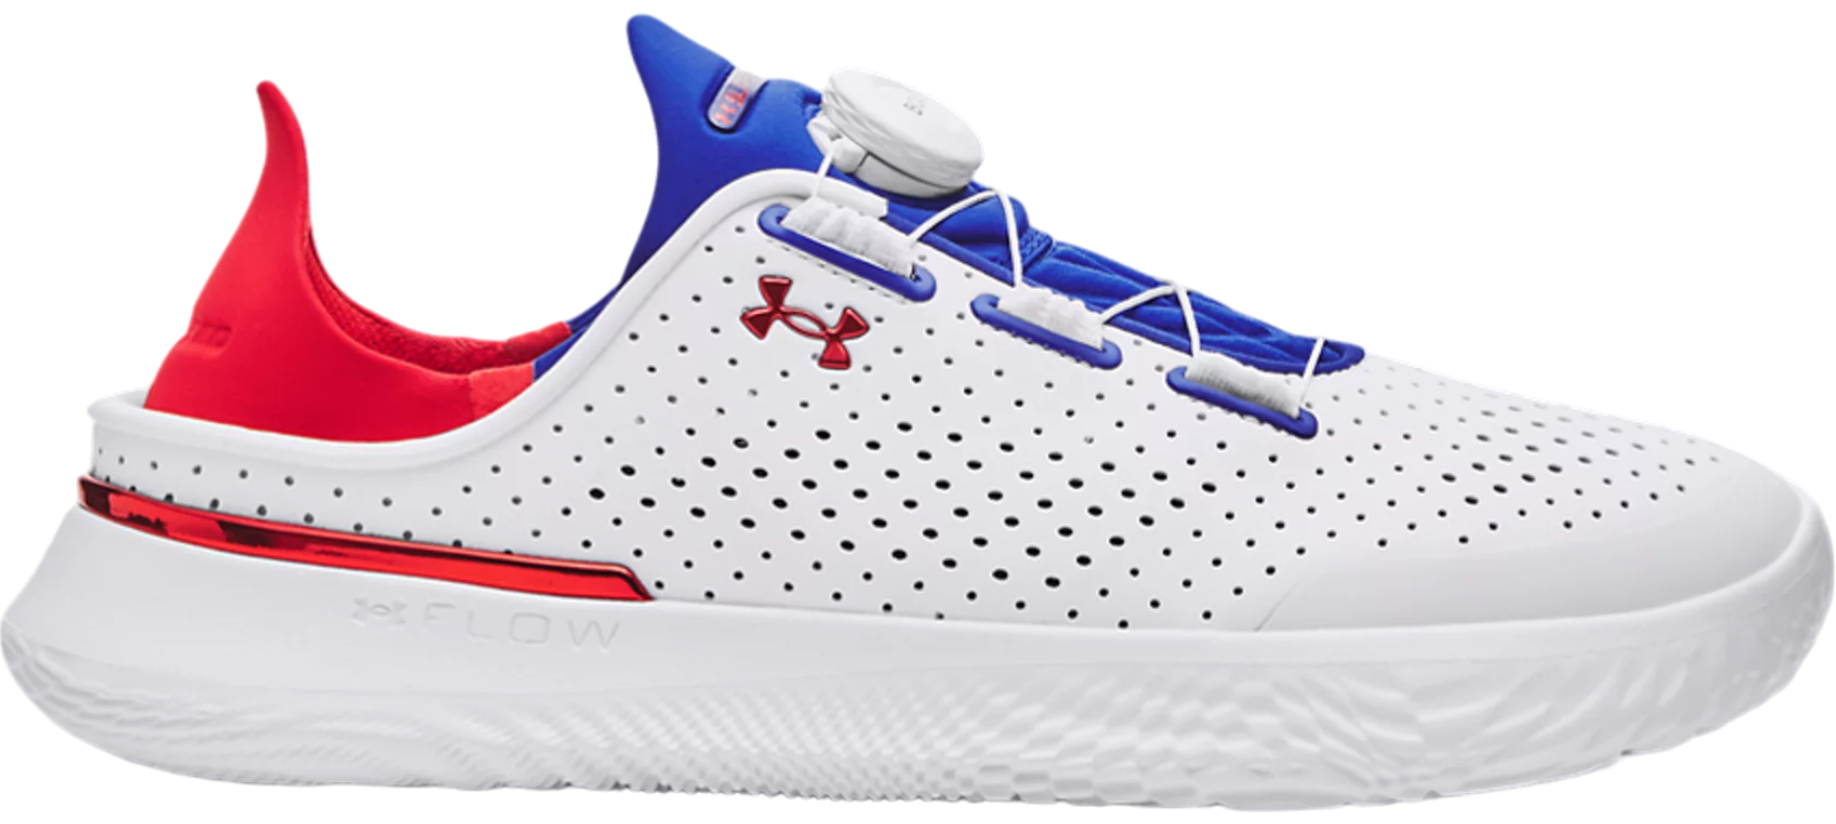 Chaussures de fitness Under Armour Flow Slipspeed Trainr SYN